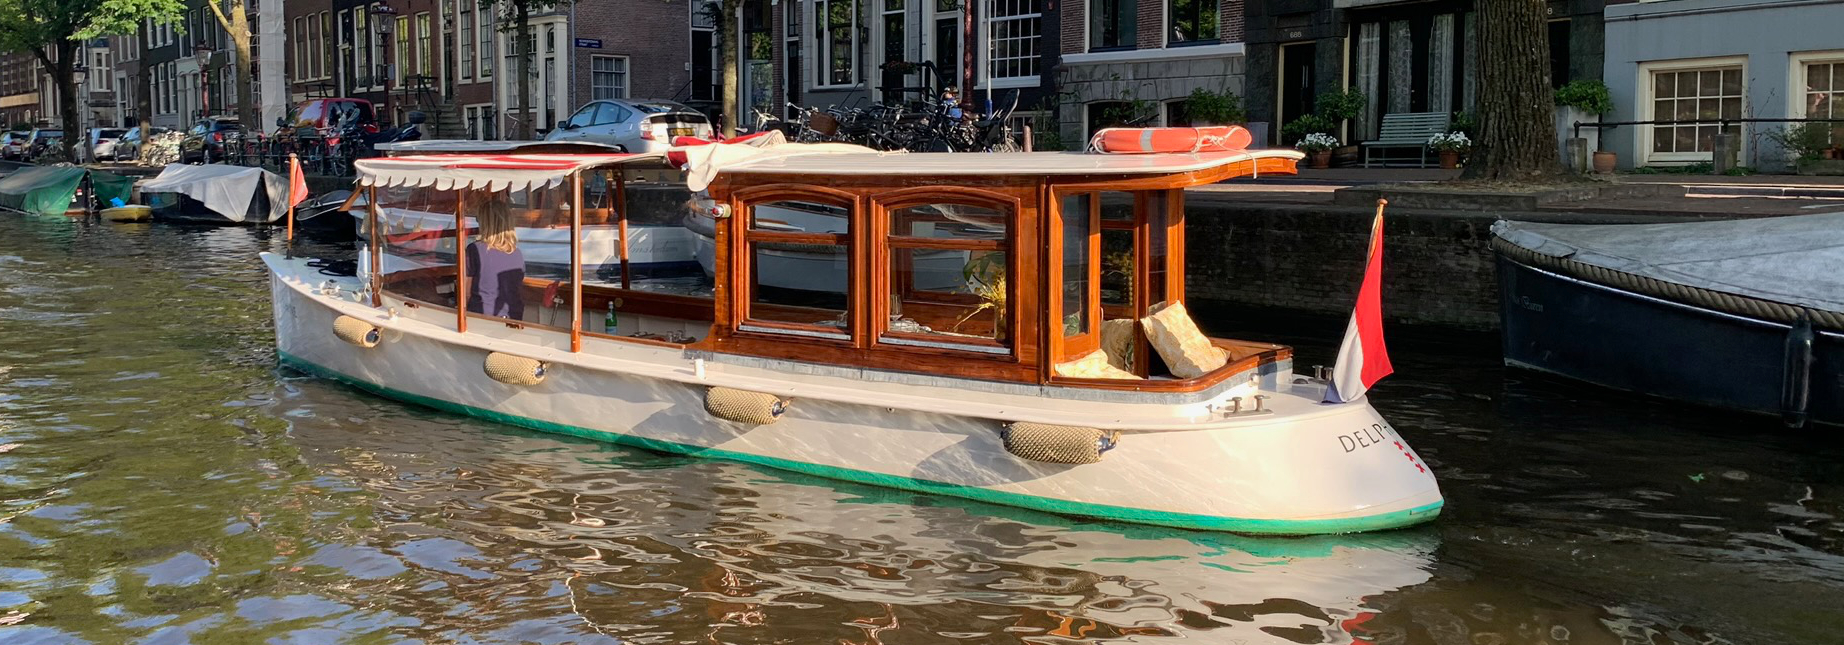 Luxurious Private boat for Sail 2020 Amsterdam